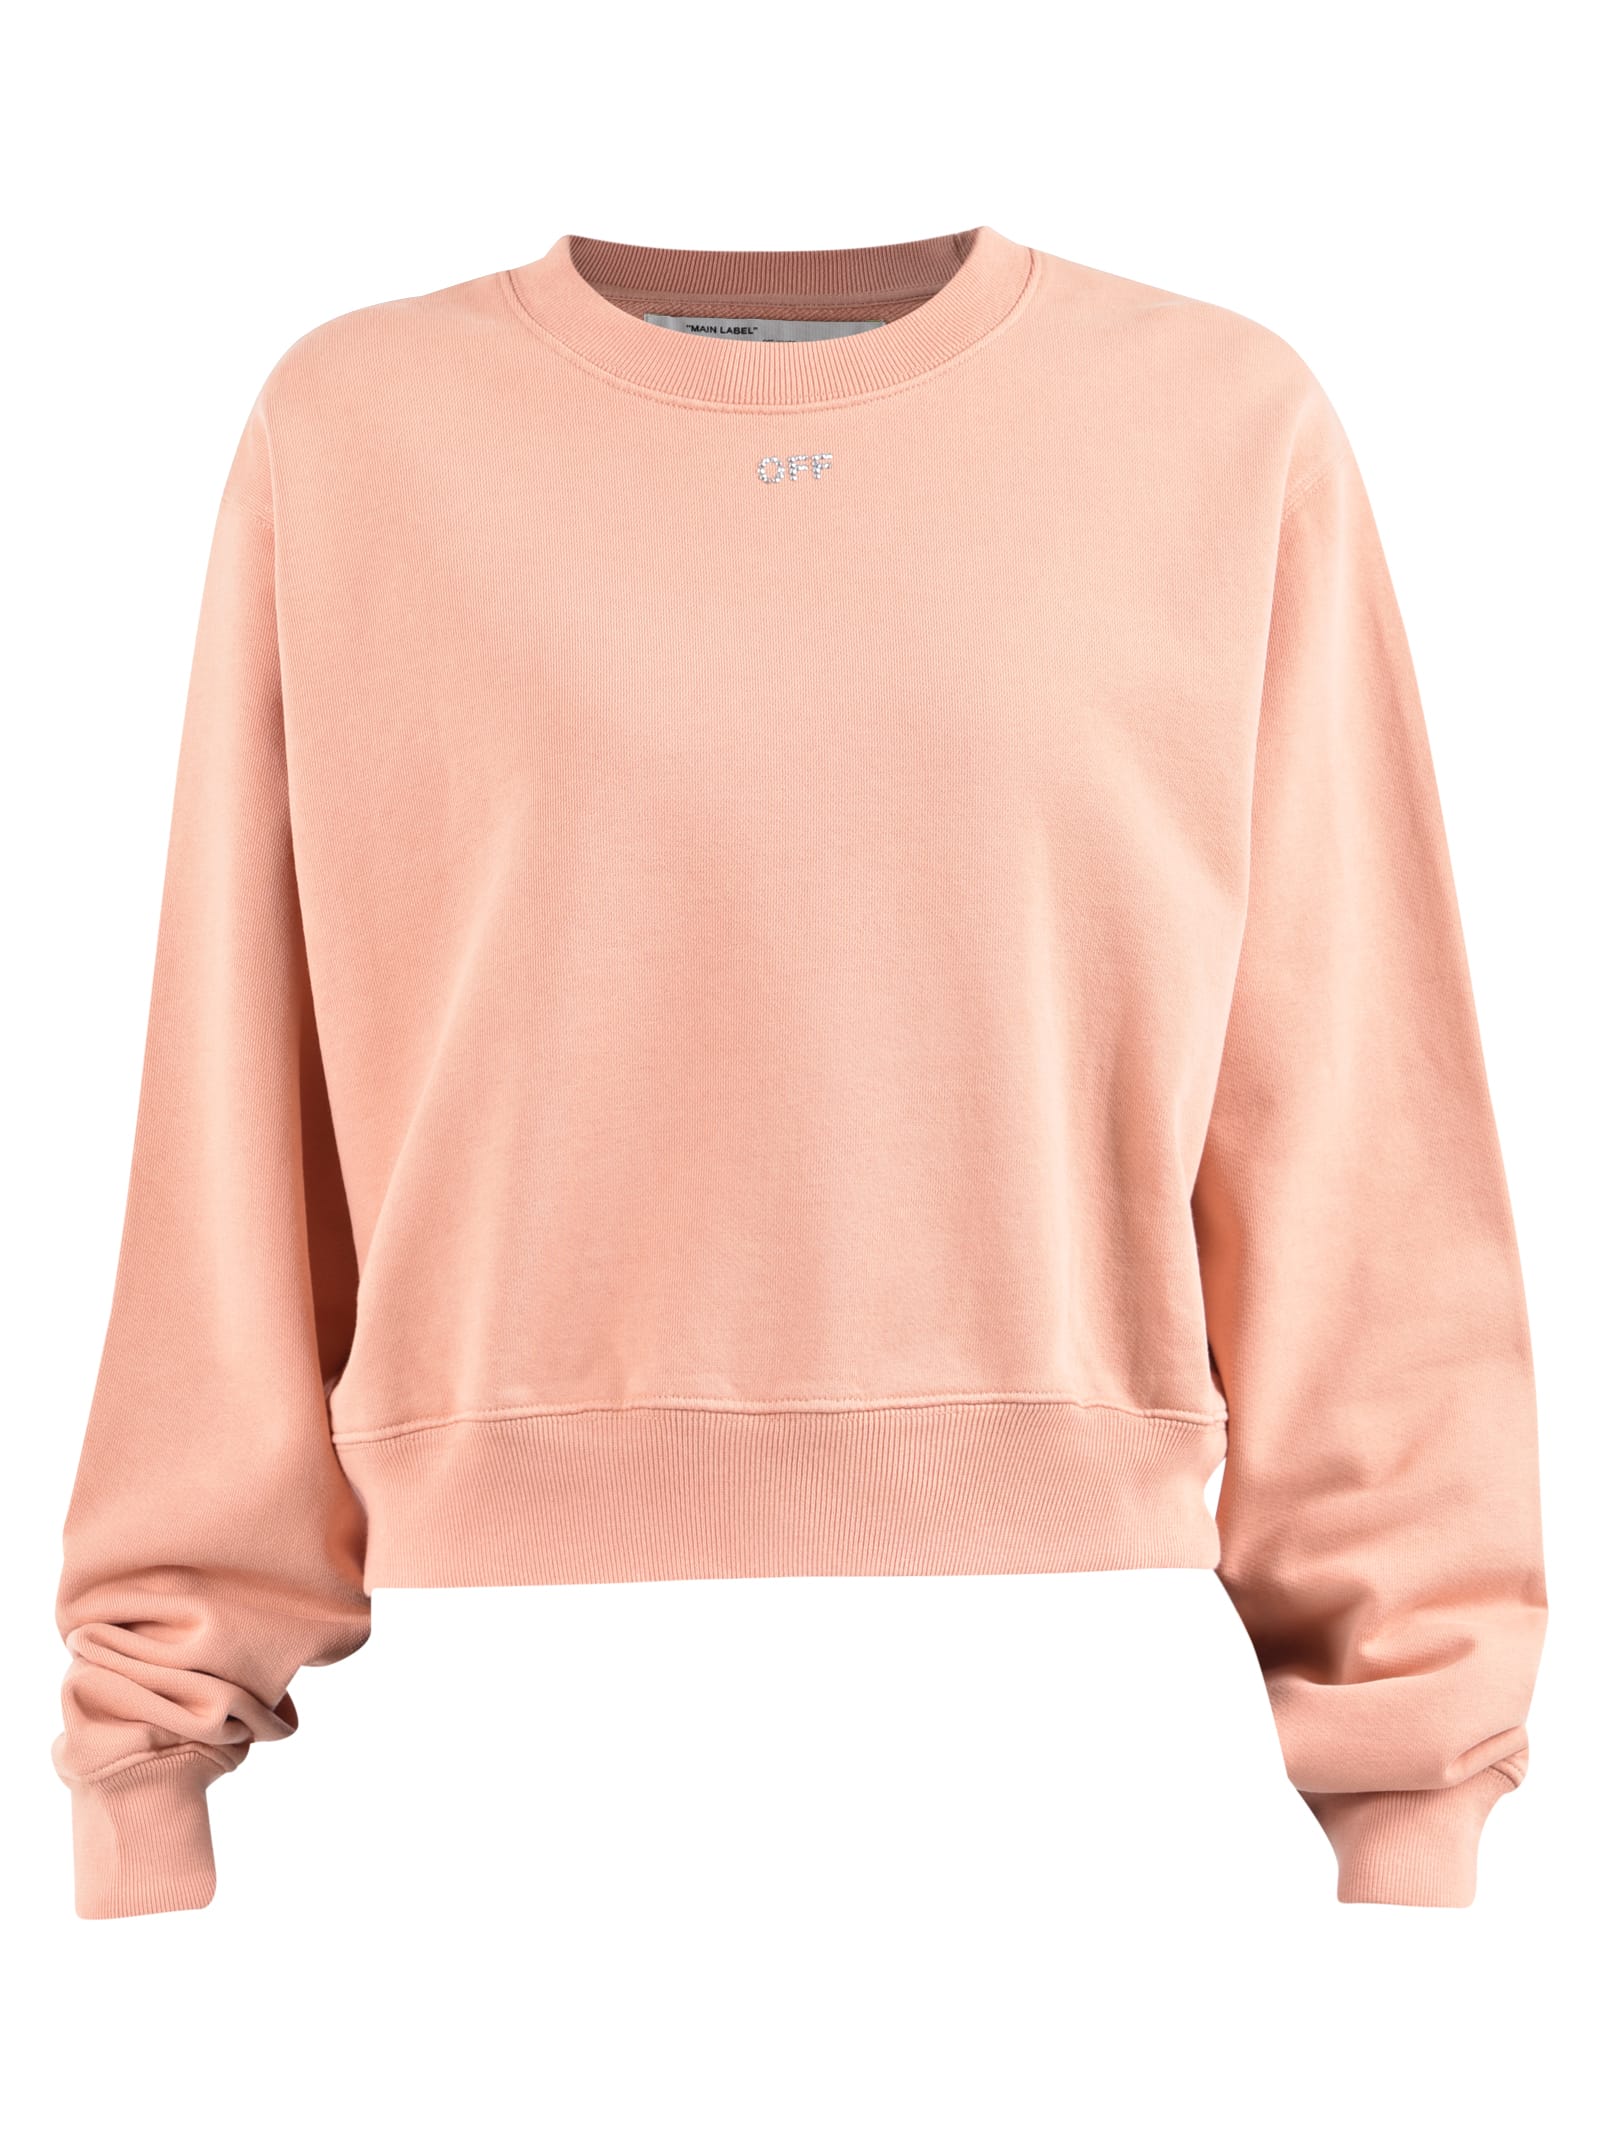 off white pink sweater